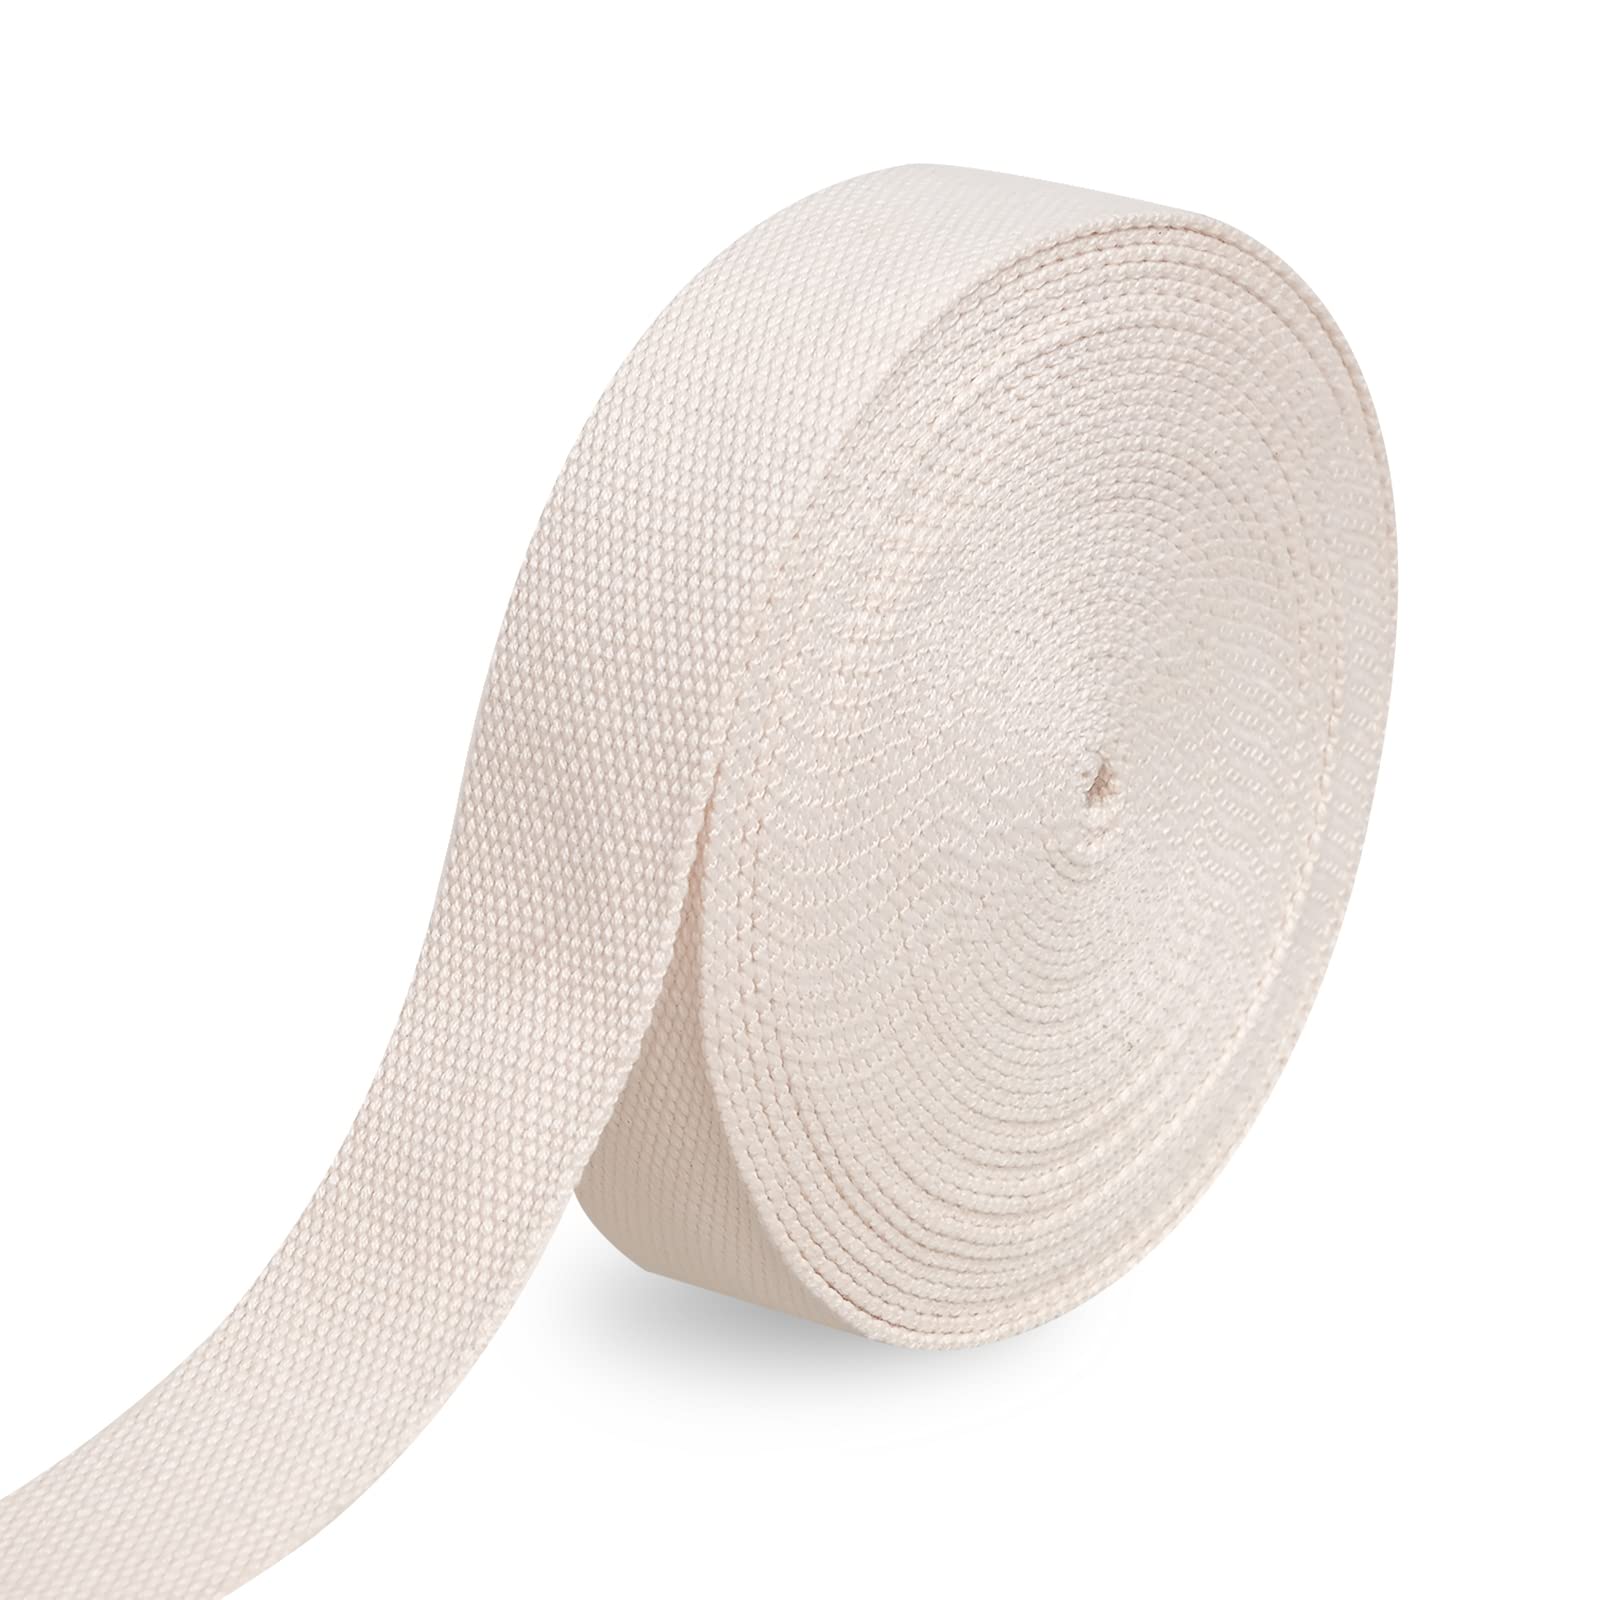 Webbing 2 Inch - Cotton Webbing Tape for Bag Straps, Cargo/Luggage  Strapping, DIY Craft, Dog Collar, 5 10 or 20 Yard/roll